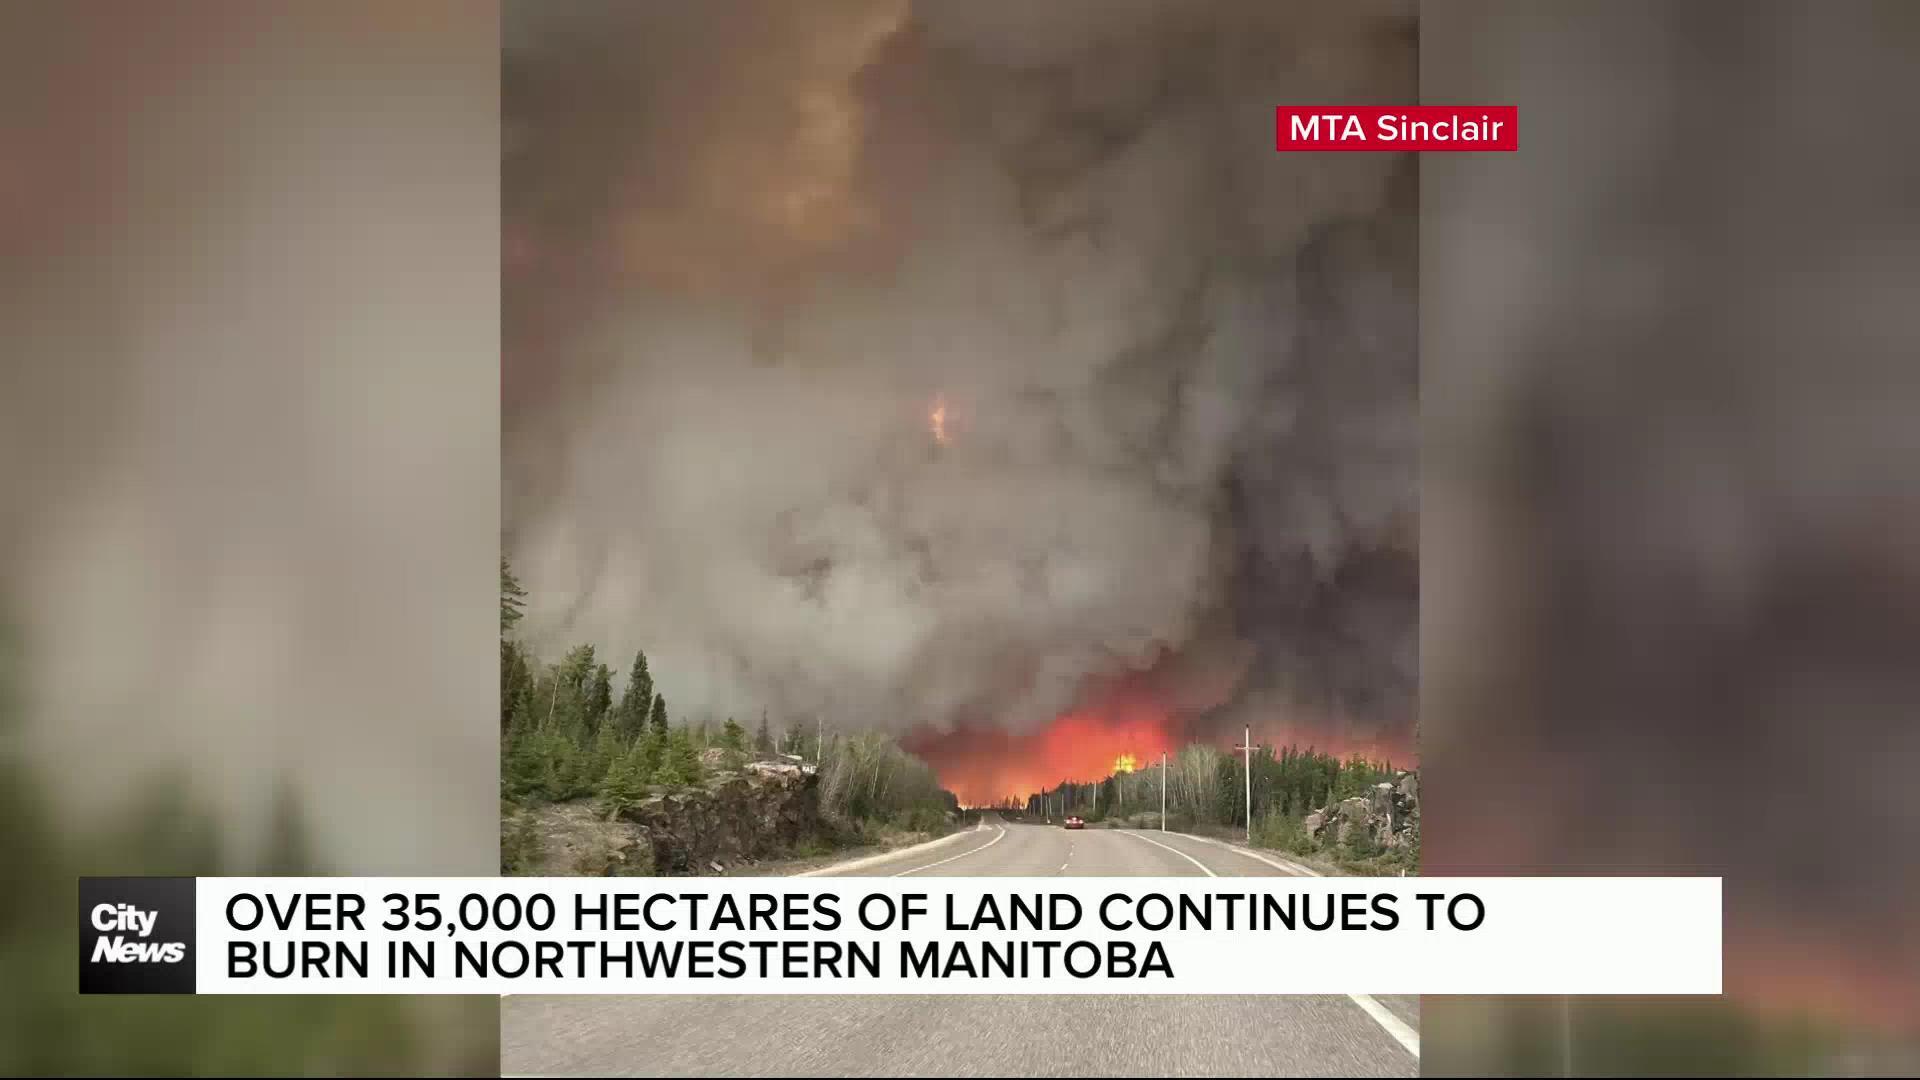 Tens of thousand of hectares continues to burn near Flin Flon, pushing smoke across Manitoba